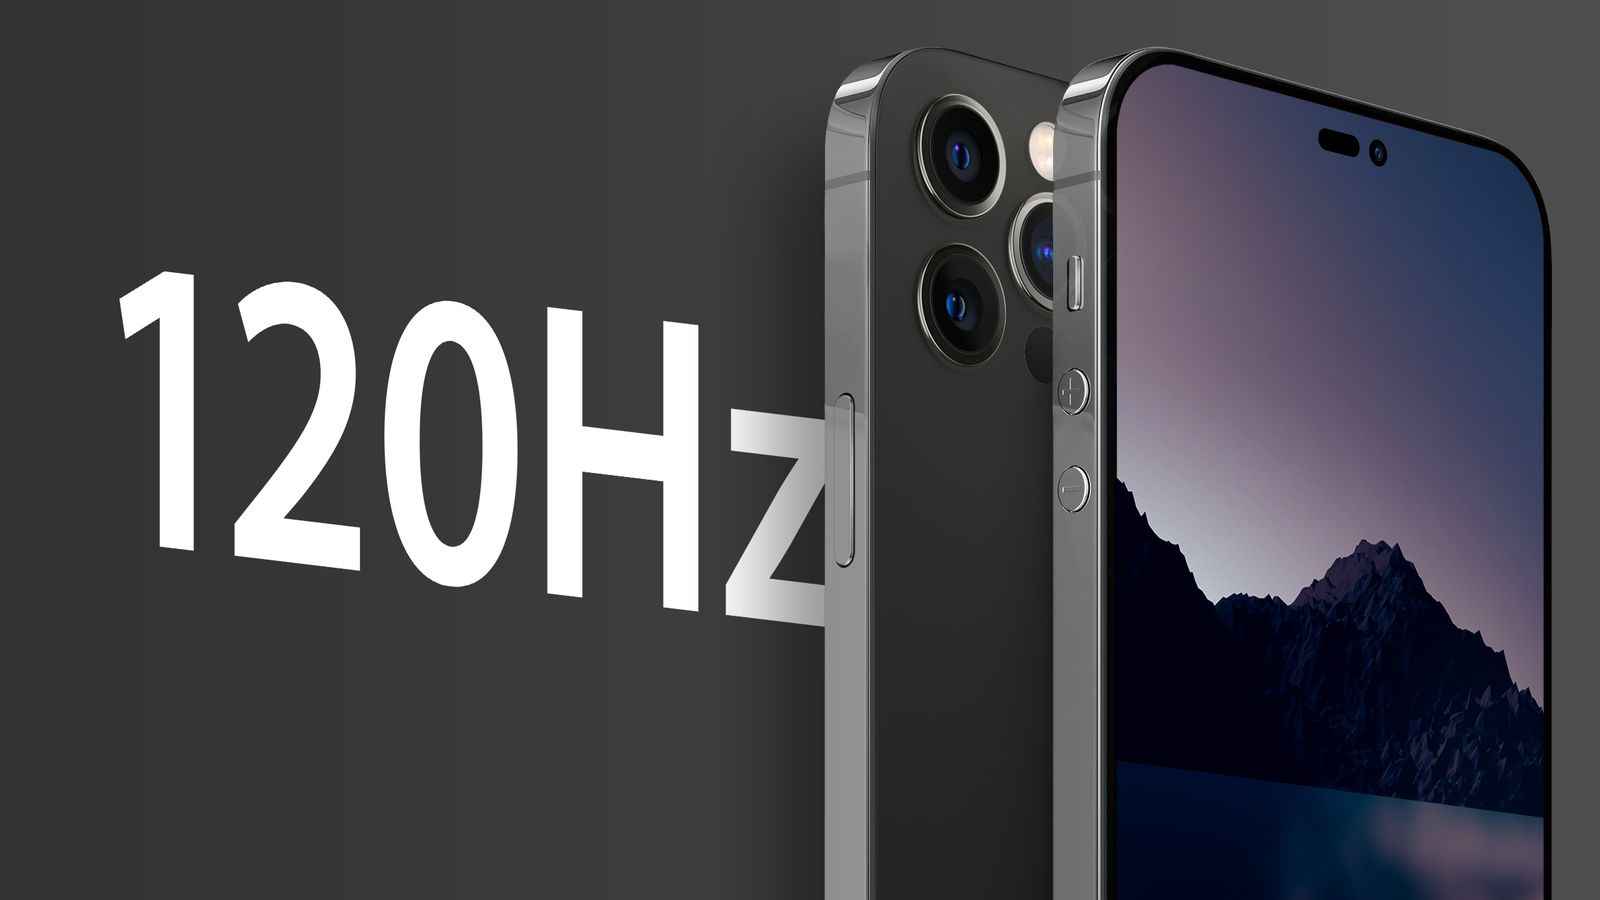 IPhone14, iPhone 14 Max may exceed the 120Hz ProMotion display